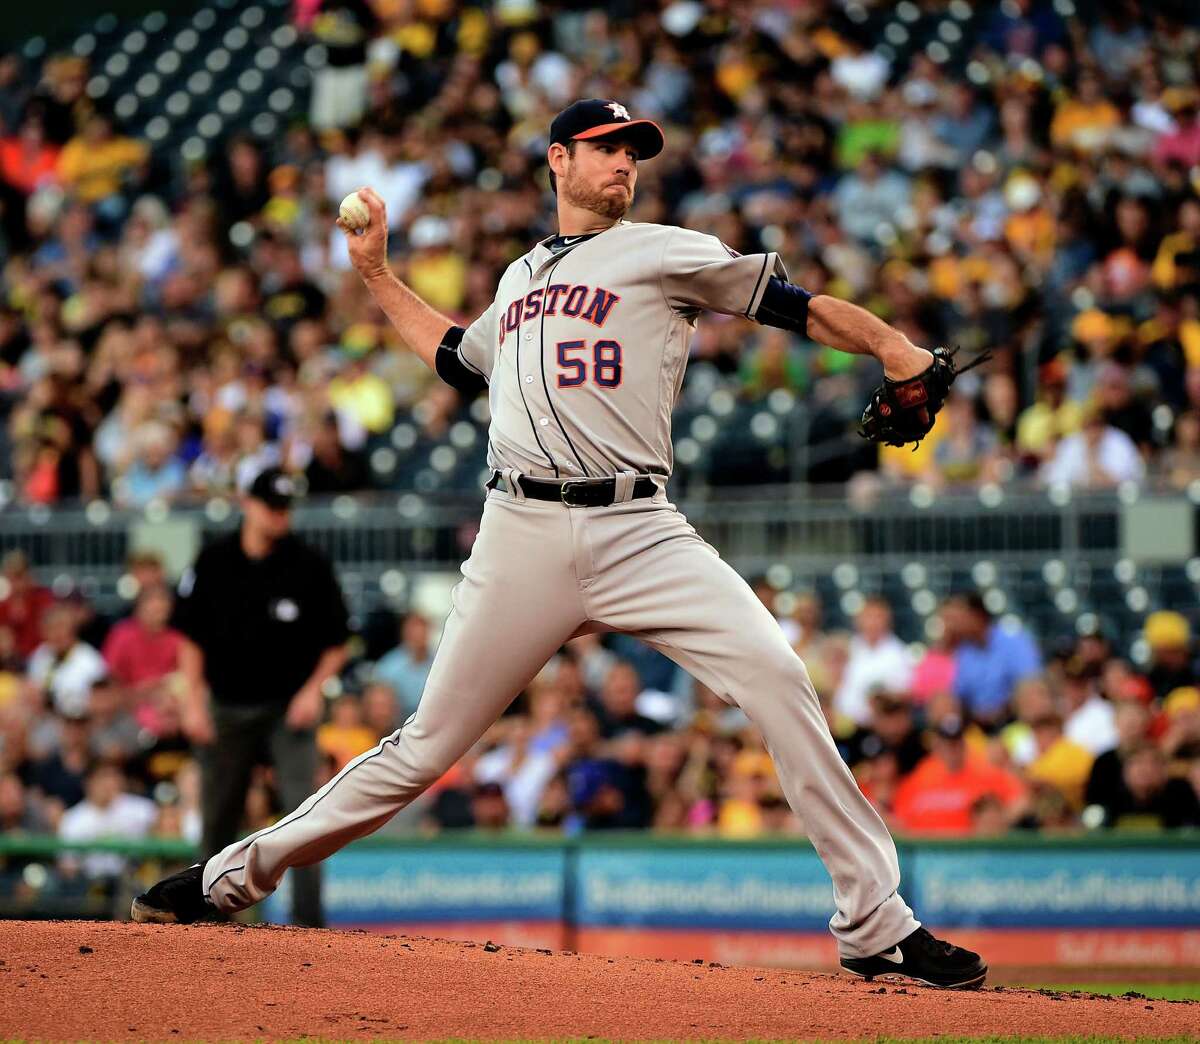 Houston Astros' Doug Fister pitches in the first inning of a baseball game against the Pittsburgh Pirates in Pittsburgh, Monday, Aug. 22, 2016. (AP Photo/Fred Vuich)